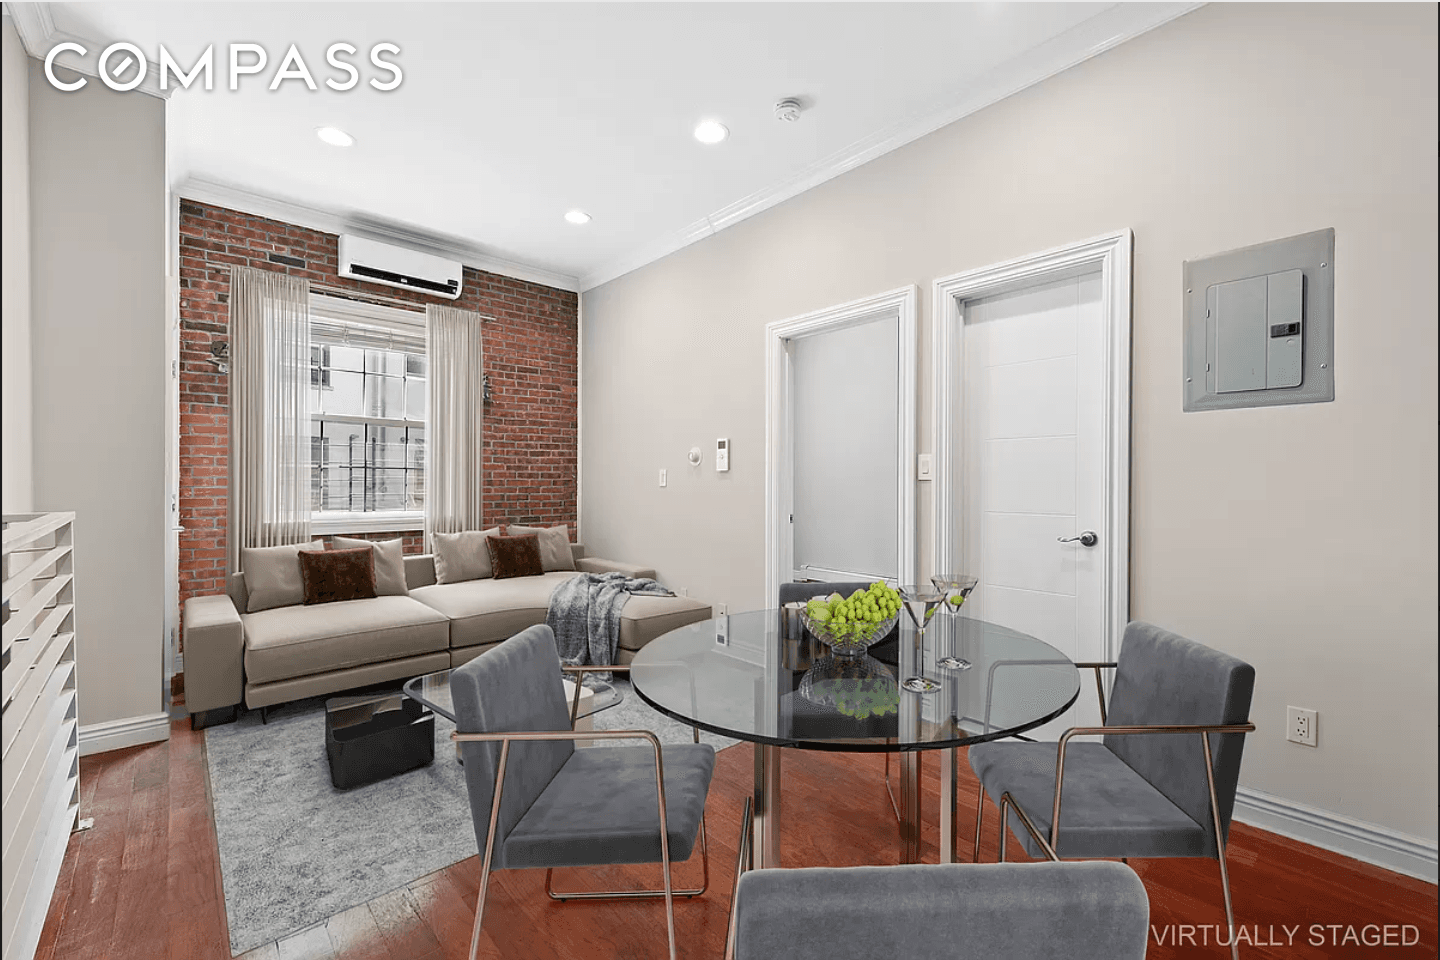 Park Slope No Fee Duplex convertible 3 bedroom, 1 bath w Stainless Steal Appliances, Hardwood Floors, Gut Renovated Kitchen and Bath, Huge Outdoor Space, and Laundry in Building Stunning convertible ...